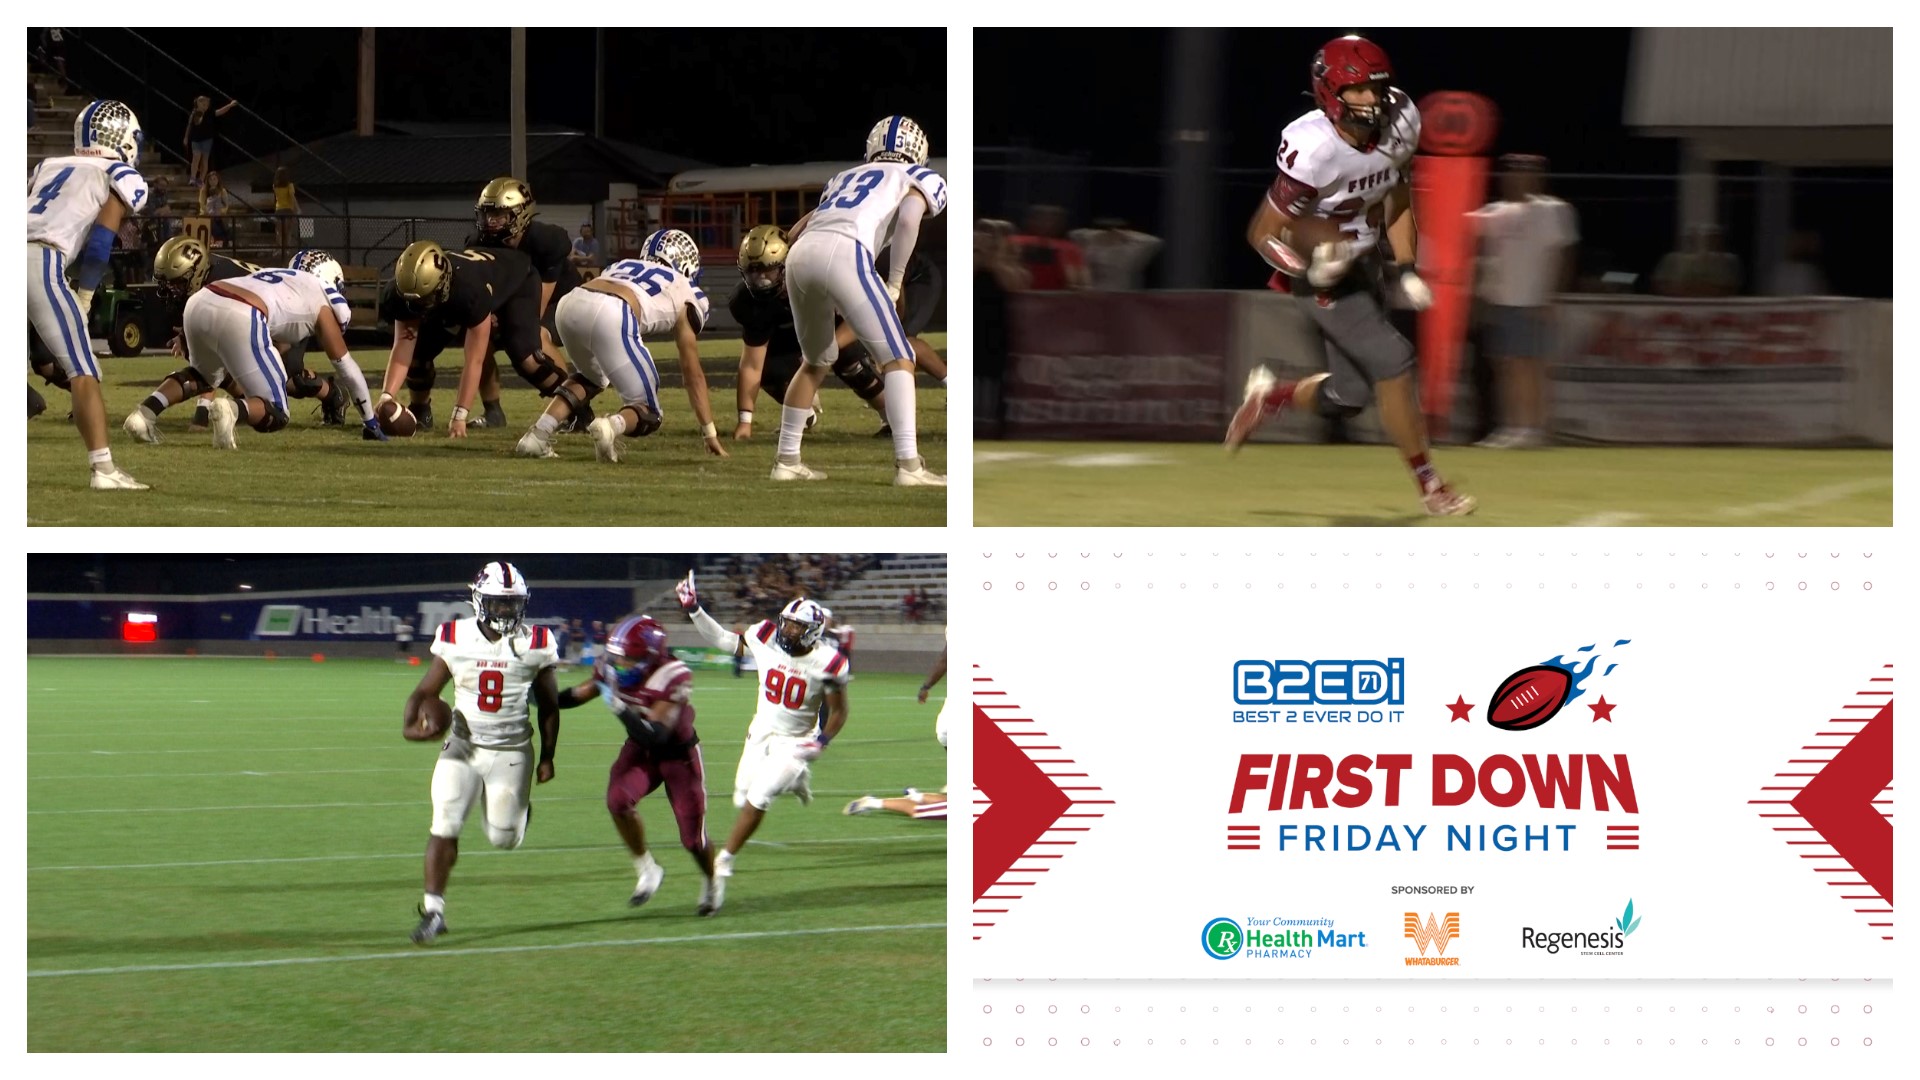 The top spot in several regions were on the line as many teams looked to remain unbeaten. See highlights and scores on B2EDi's First Down Friday Night of Week 4.